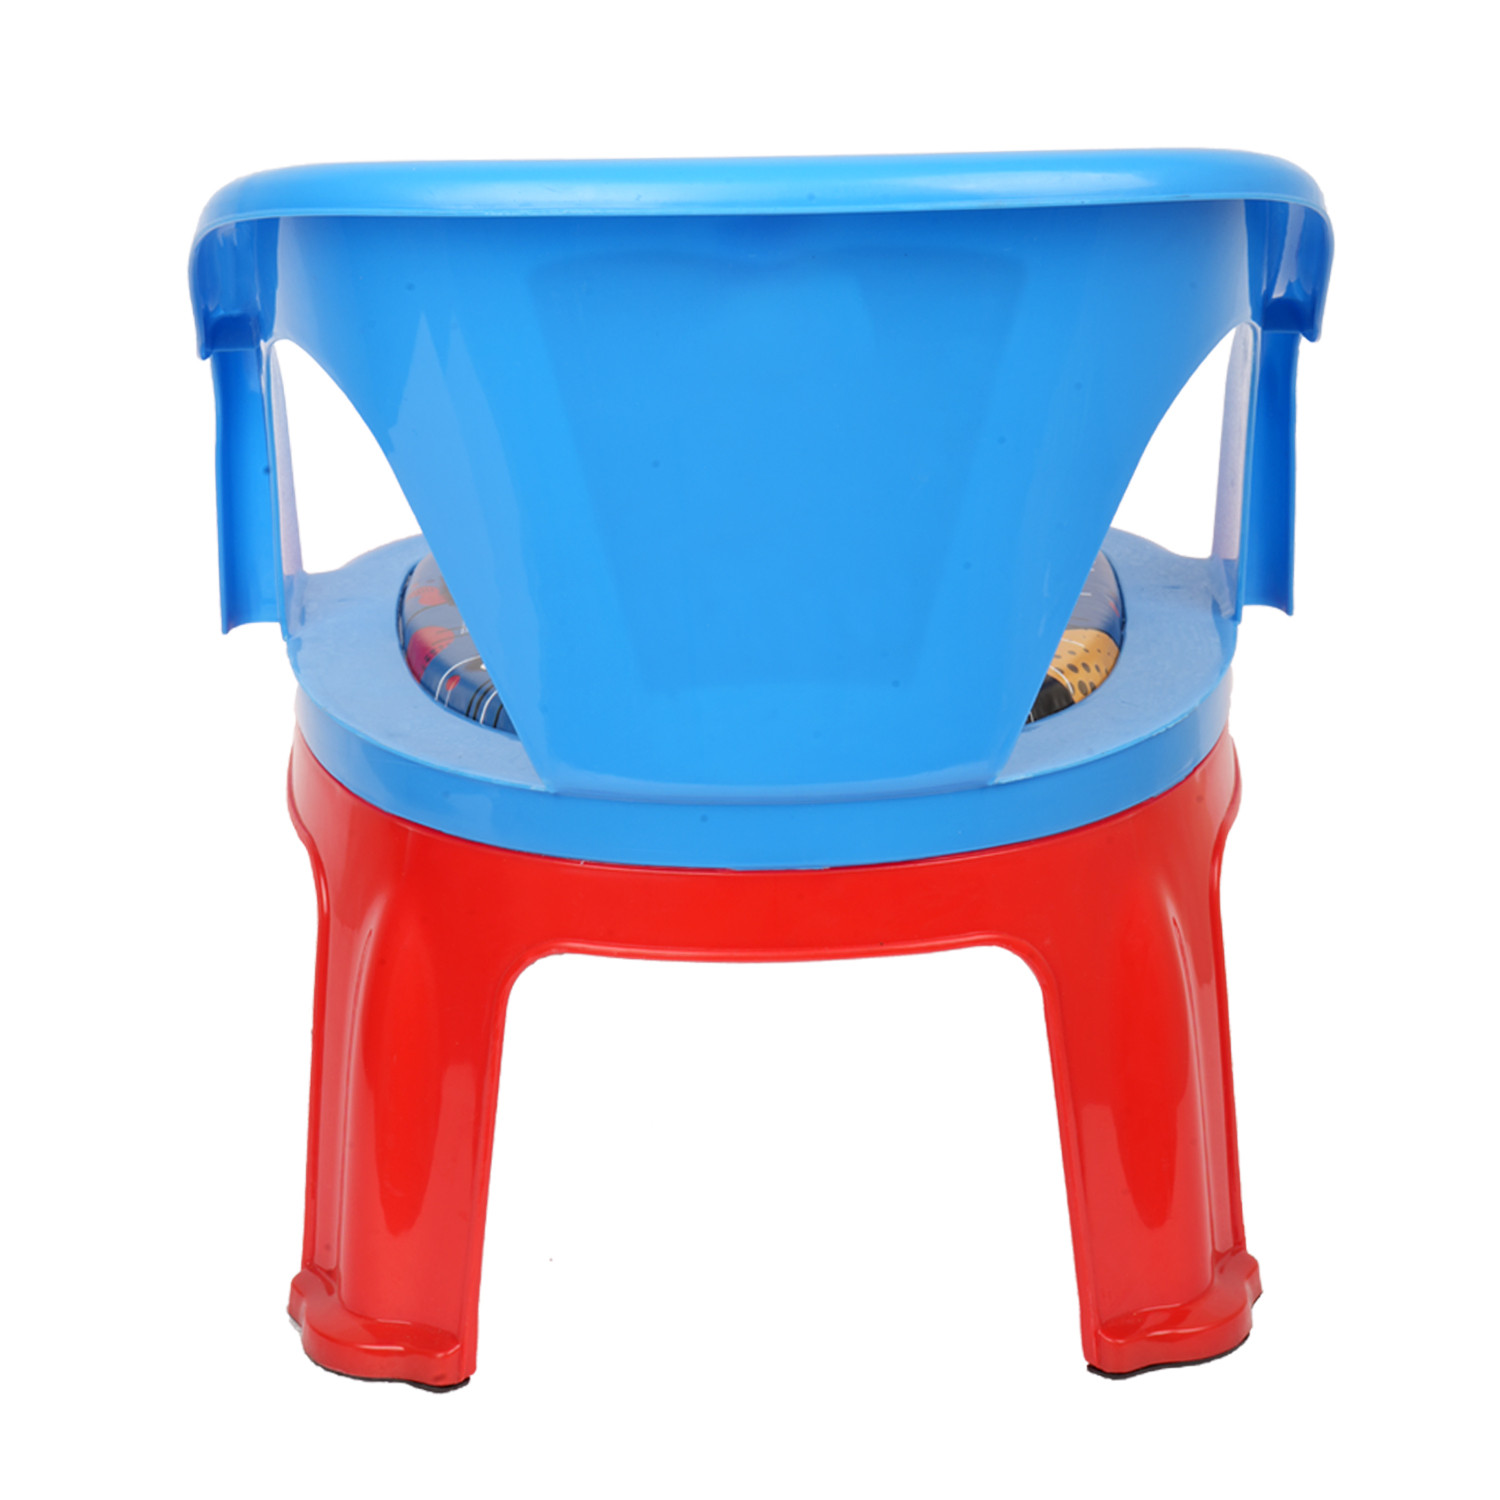 Kuber Industries Marvel Spider-Man Kids Chair | Plastic Foldable Kids Chair | Chair for Kidsroom | School Study Stool | Baby Stool | Indoor or Outdoor Stool for Kids | Capacity 30 Kg | Blue & Red